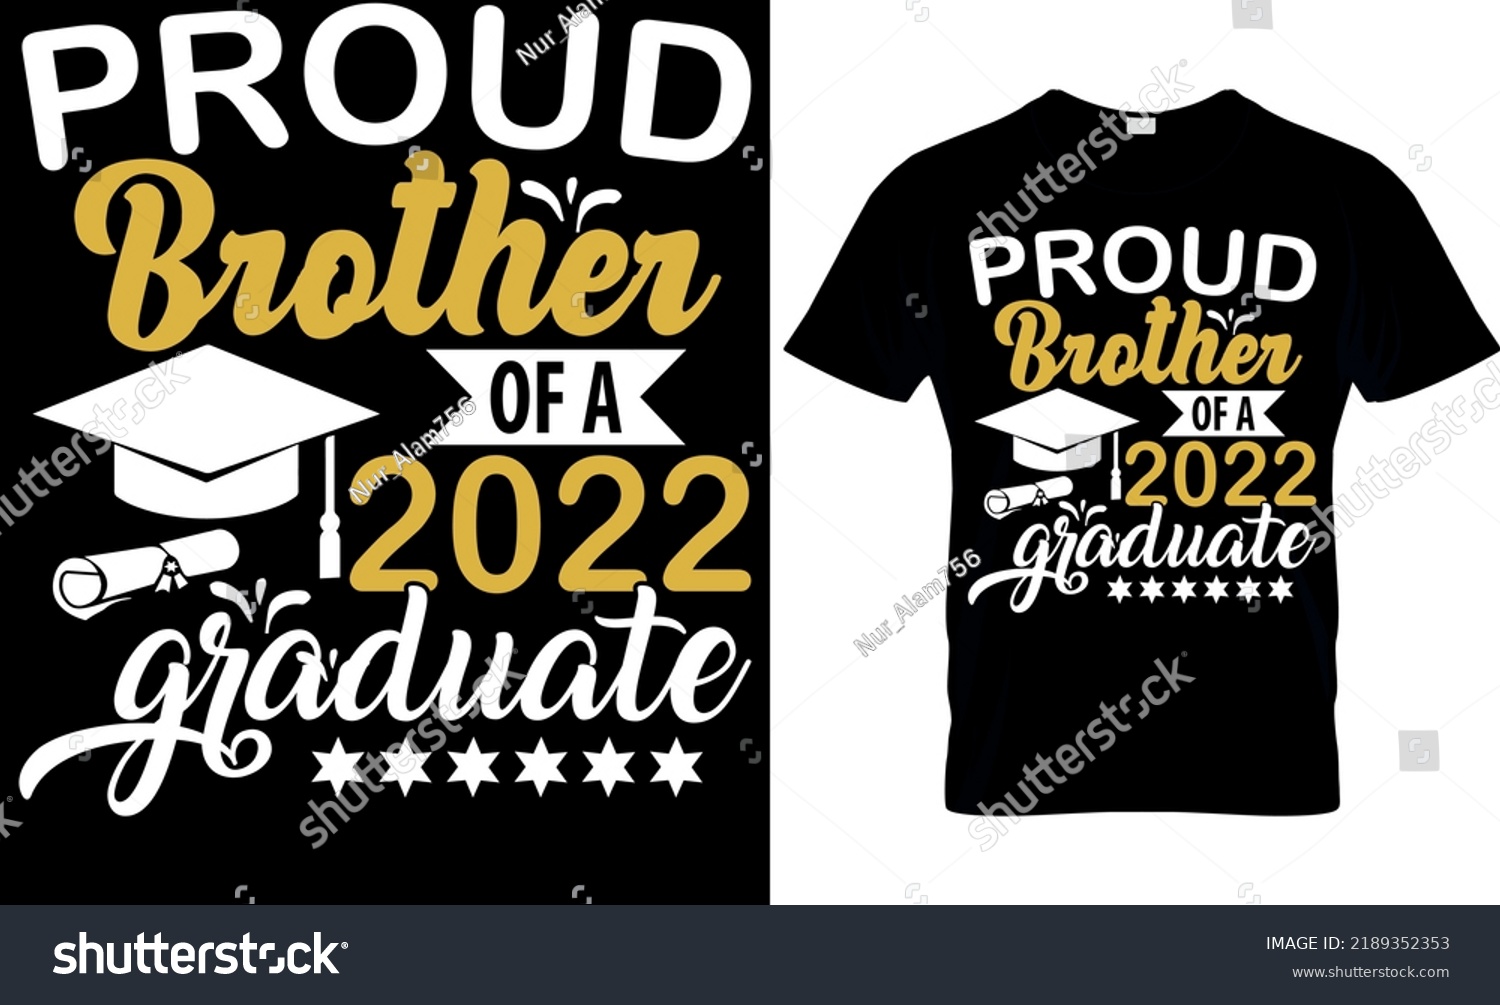 SVG of Proud Brother of a 2022 Graduate T-shirt high quality is a unique design. svg